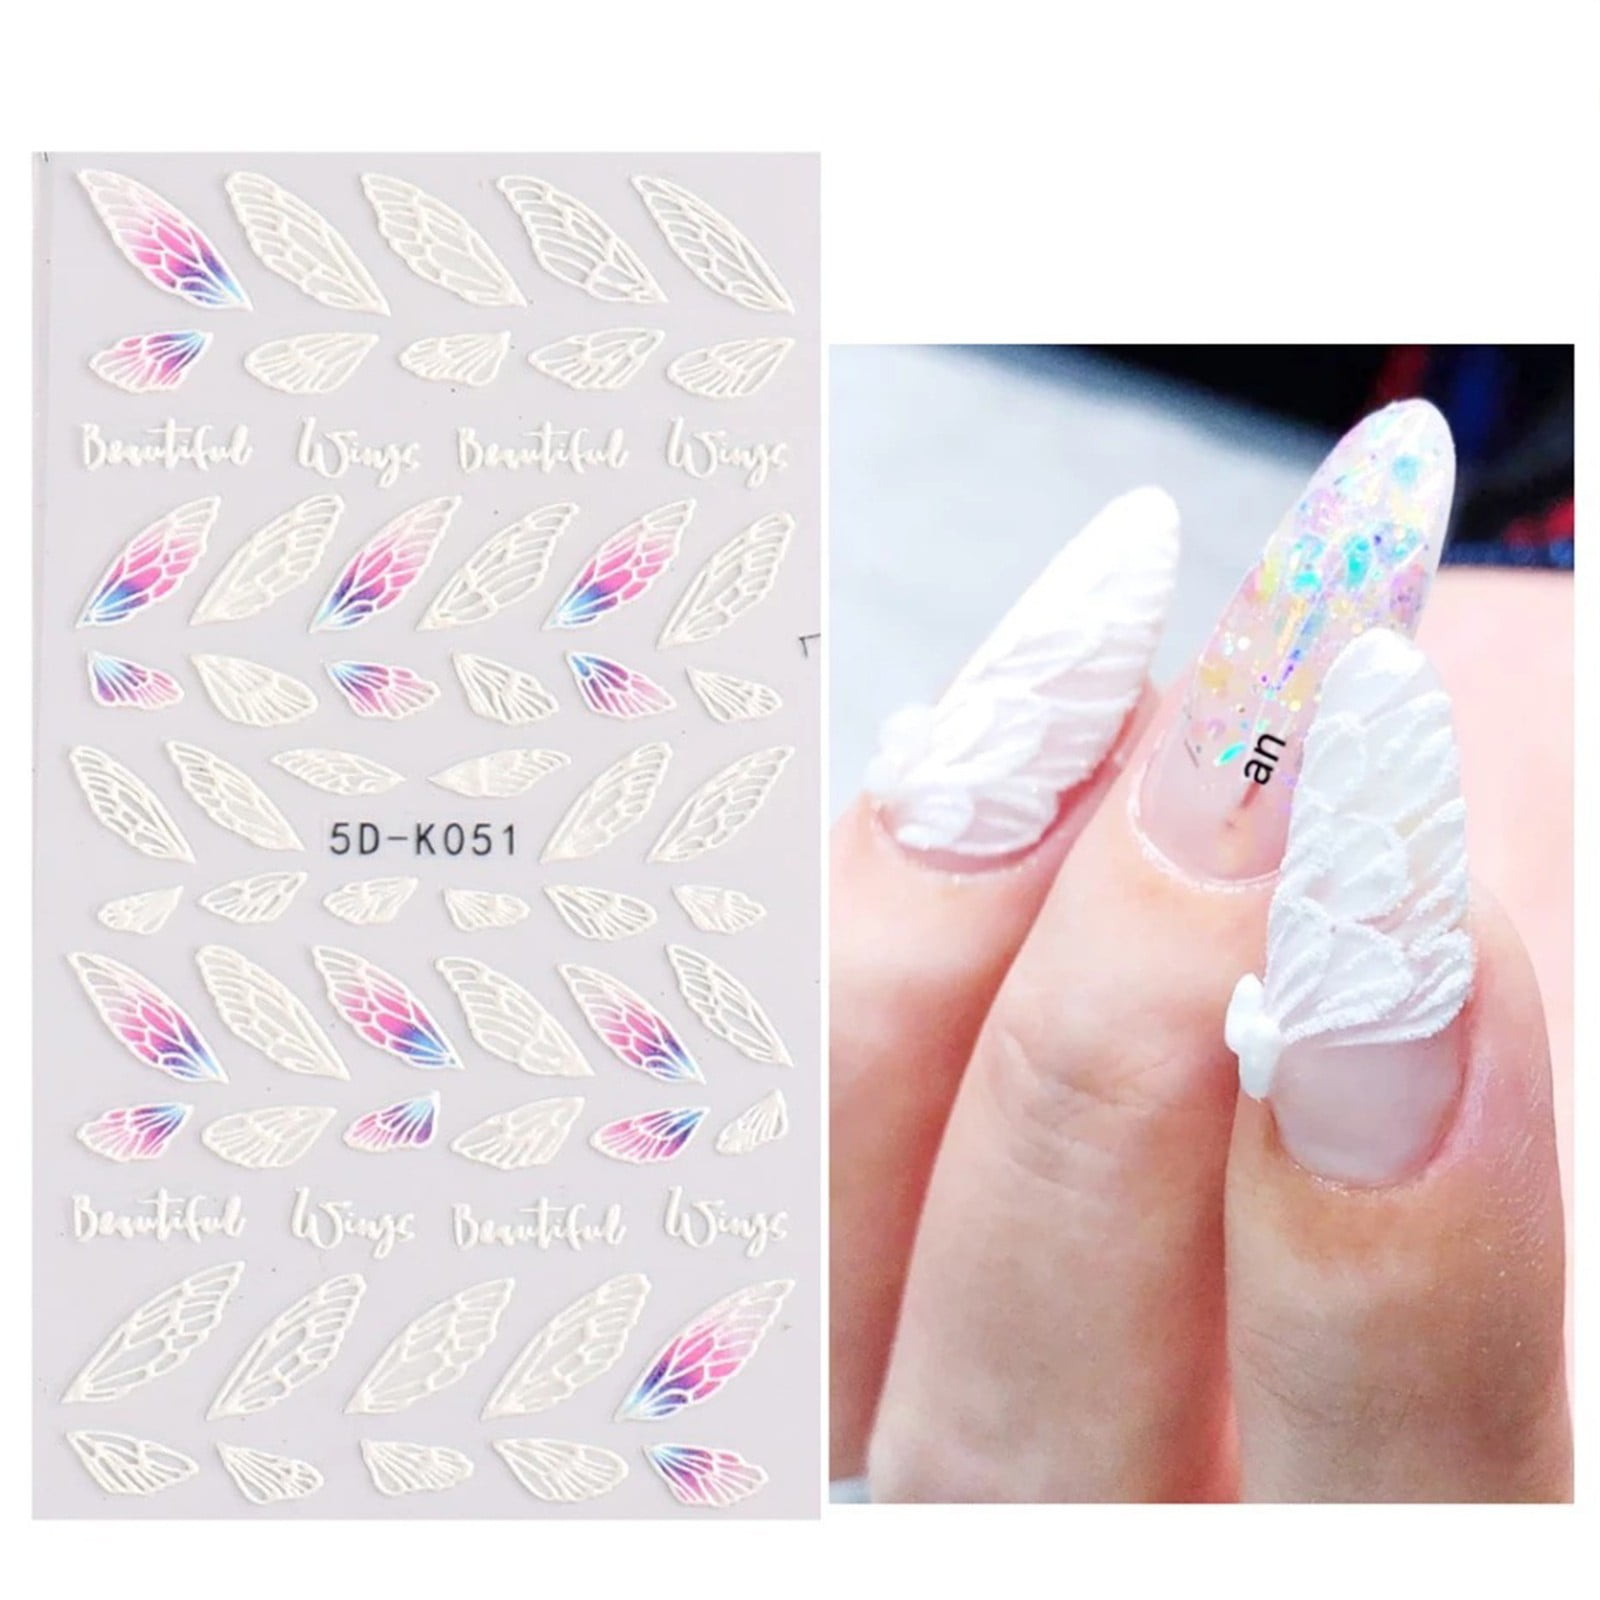 Designer Shiny Full Cover Nail Stickers Black Pure Solid Color Temporary  Tattoos For Kids Nails From Omnigift06, $2.9 | DHgate.Com